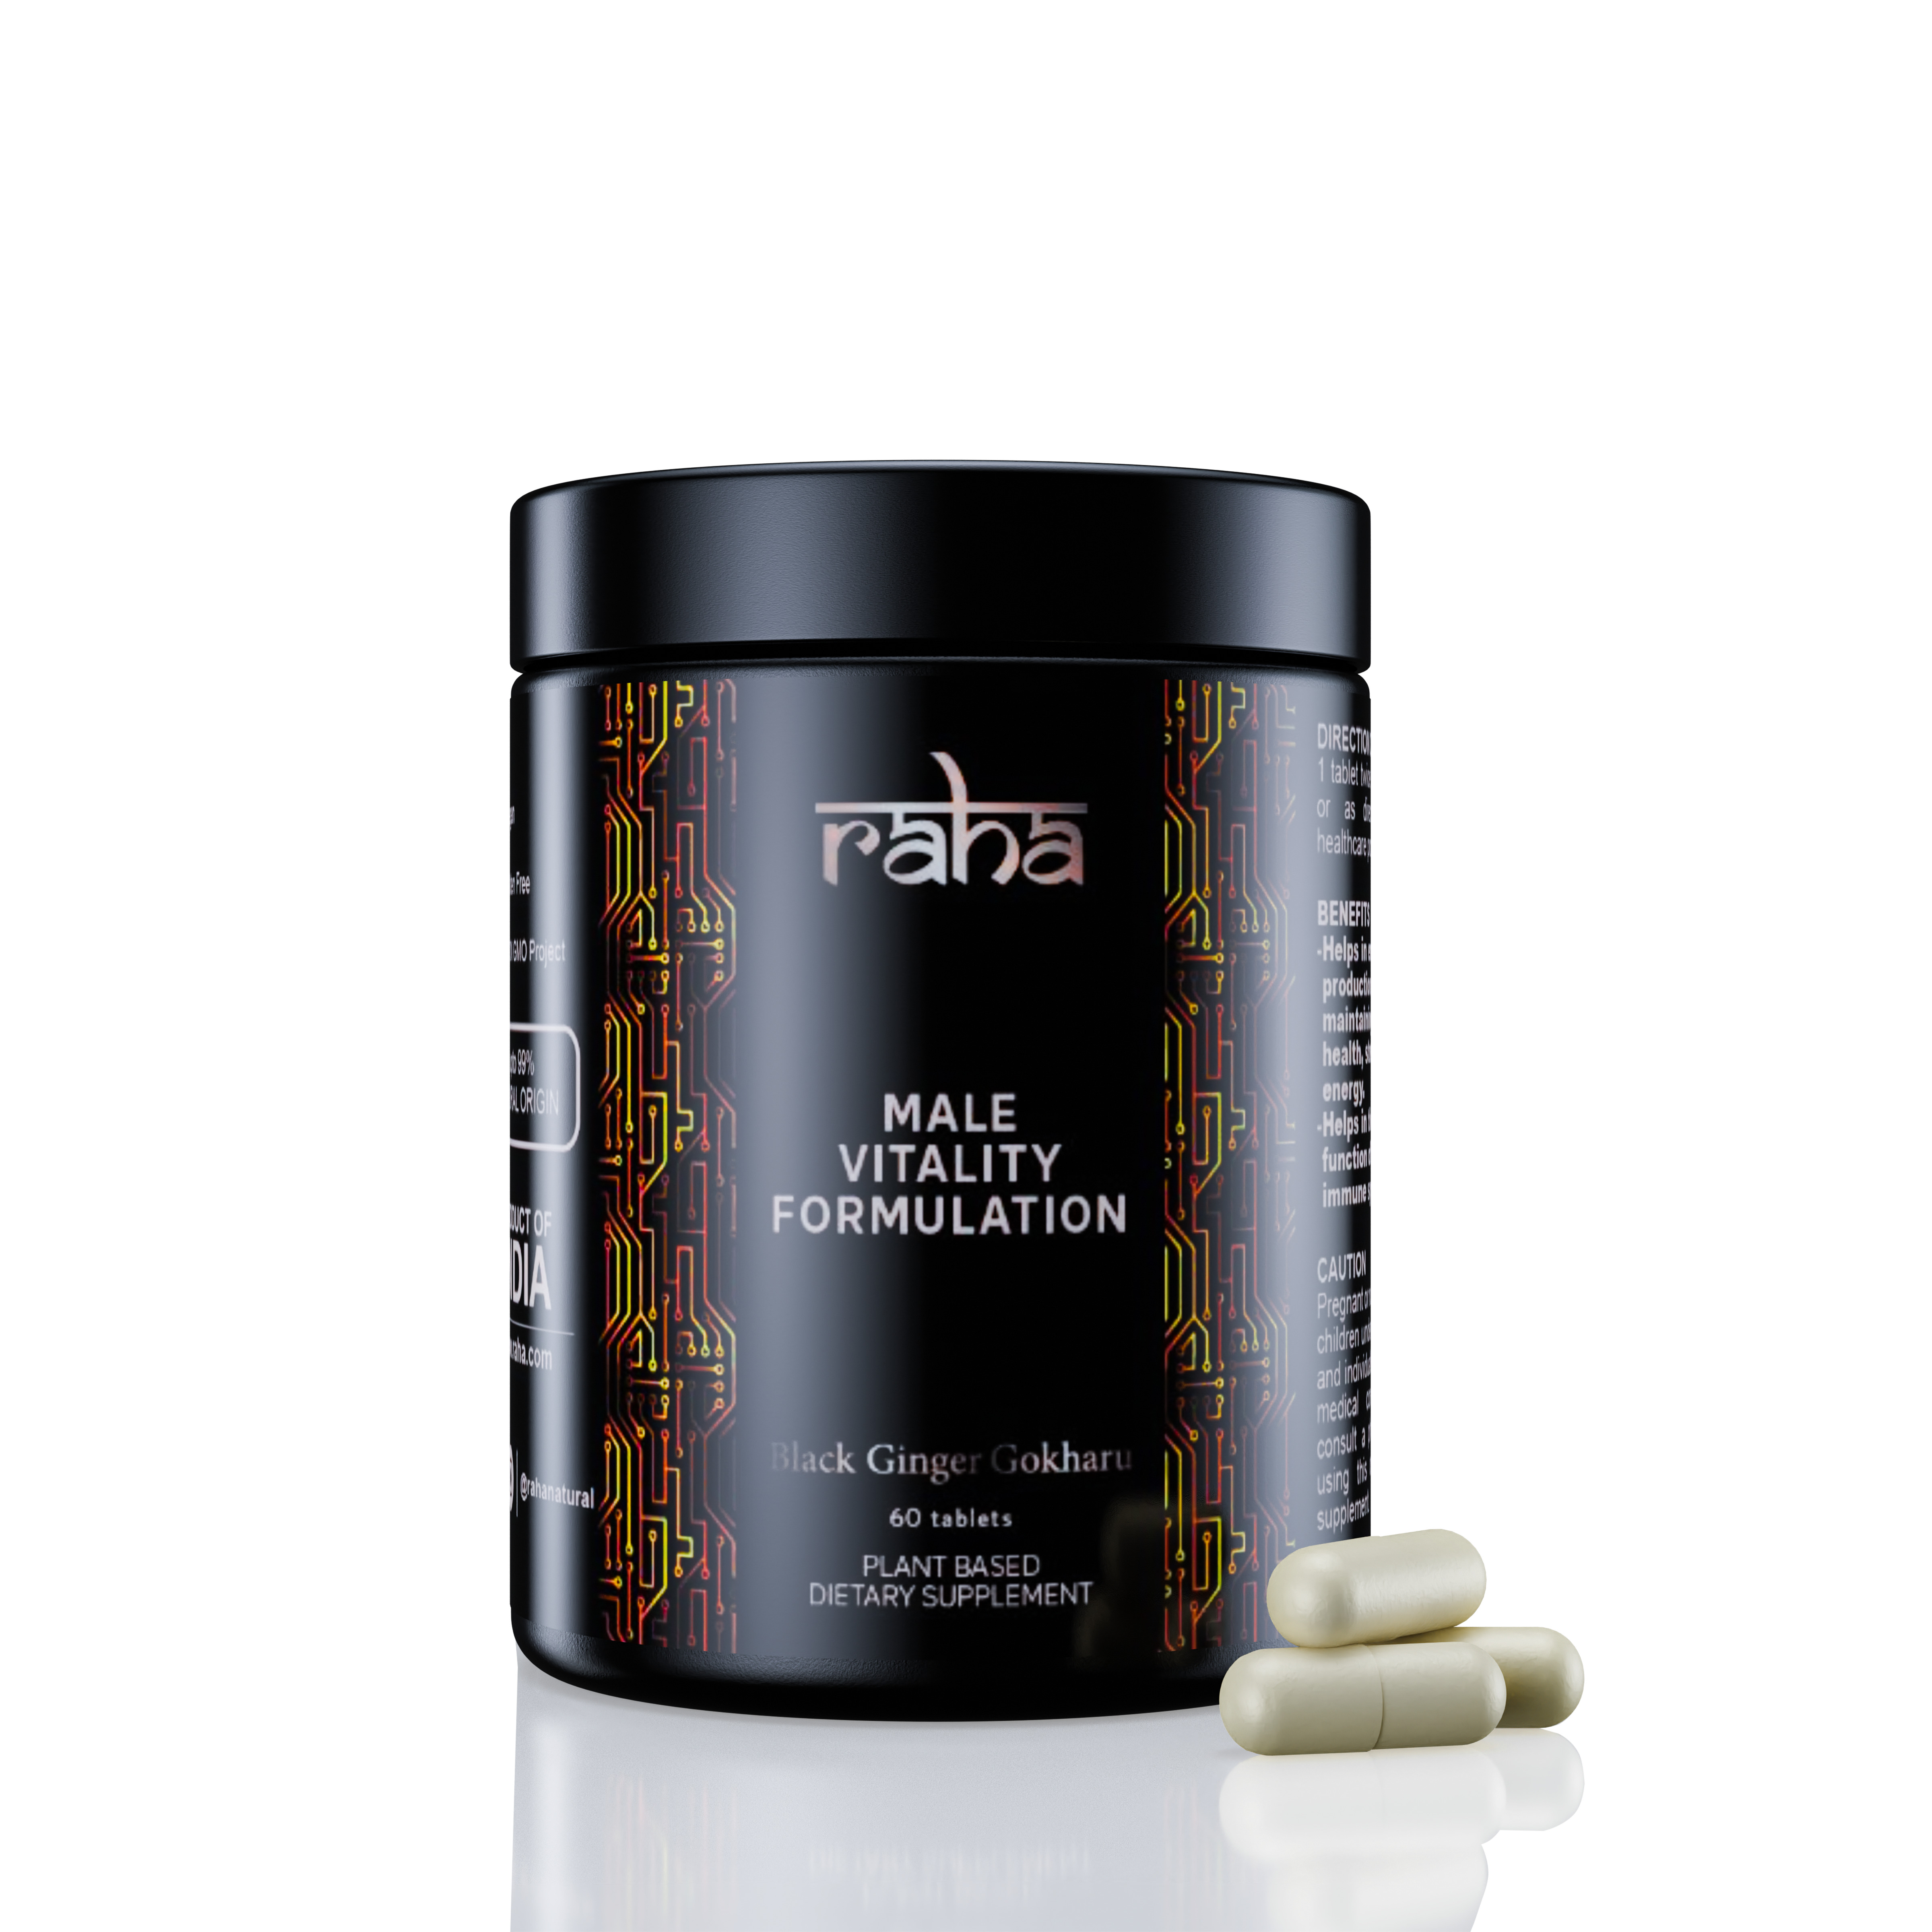 Raha male vitality formulation for male health and sexual performance